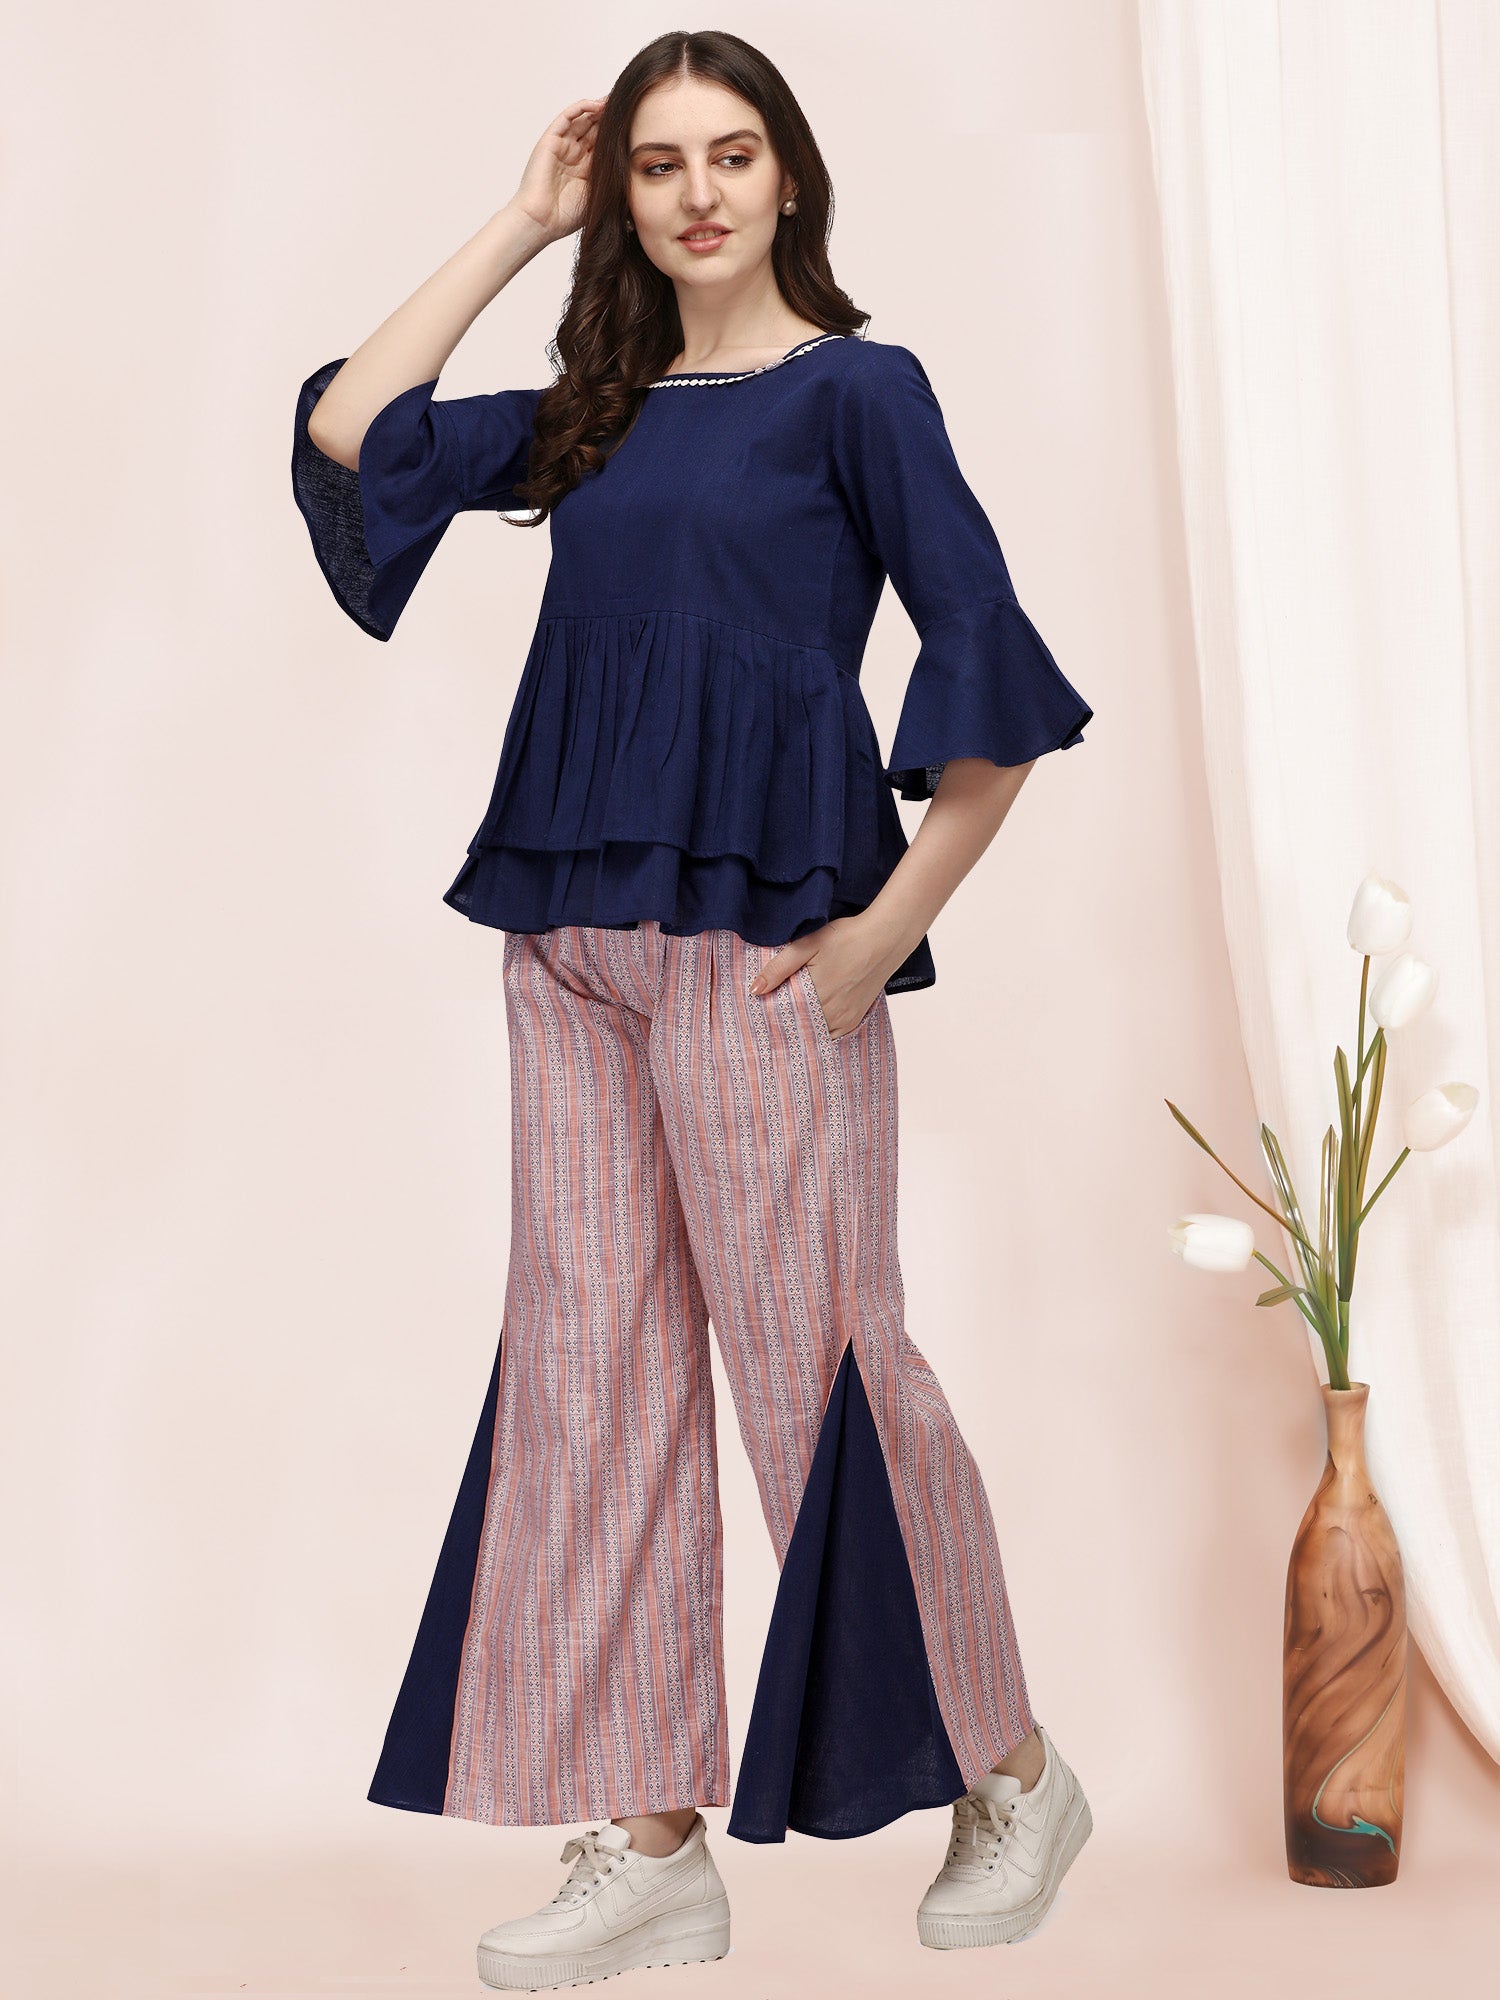 Women's Daily Wear Navy Blue Pleated Peplum Top With Strip Palazzo Pant - MESMORA FASHION